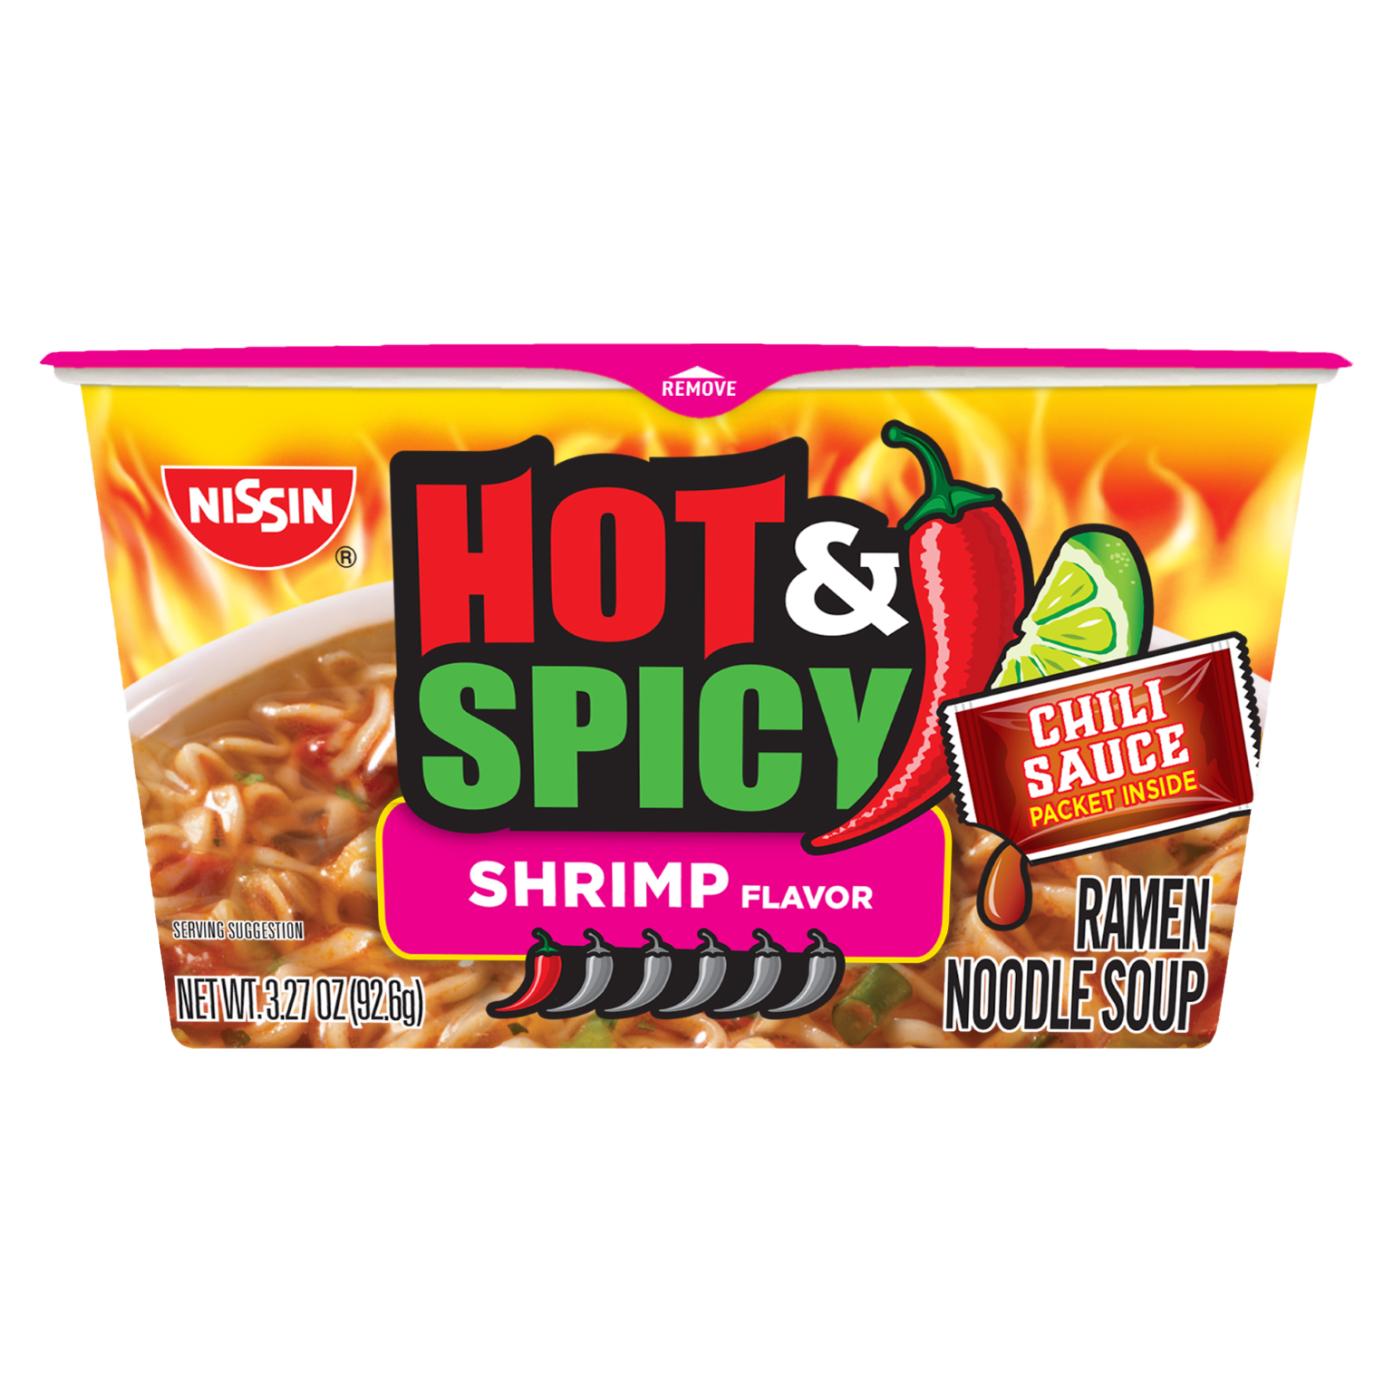 Nissin Hot & Spicy with Shrimp Ramen Noodle Soup; image 1 of 6